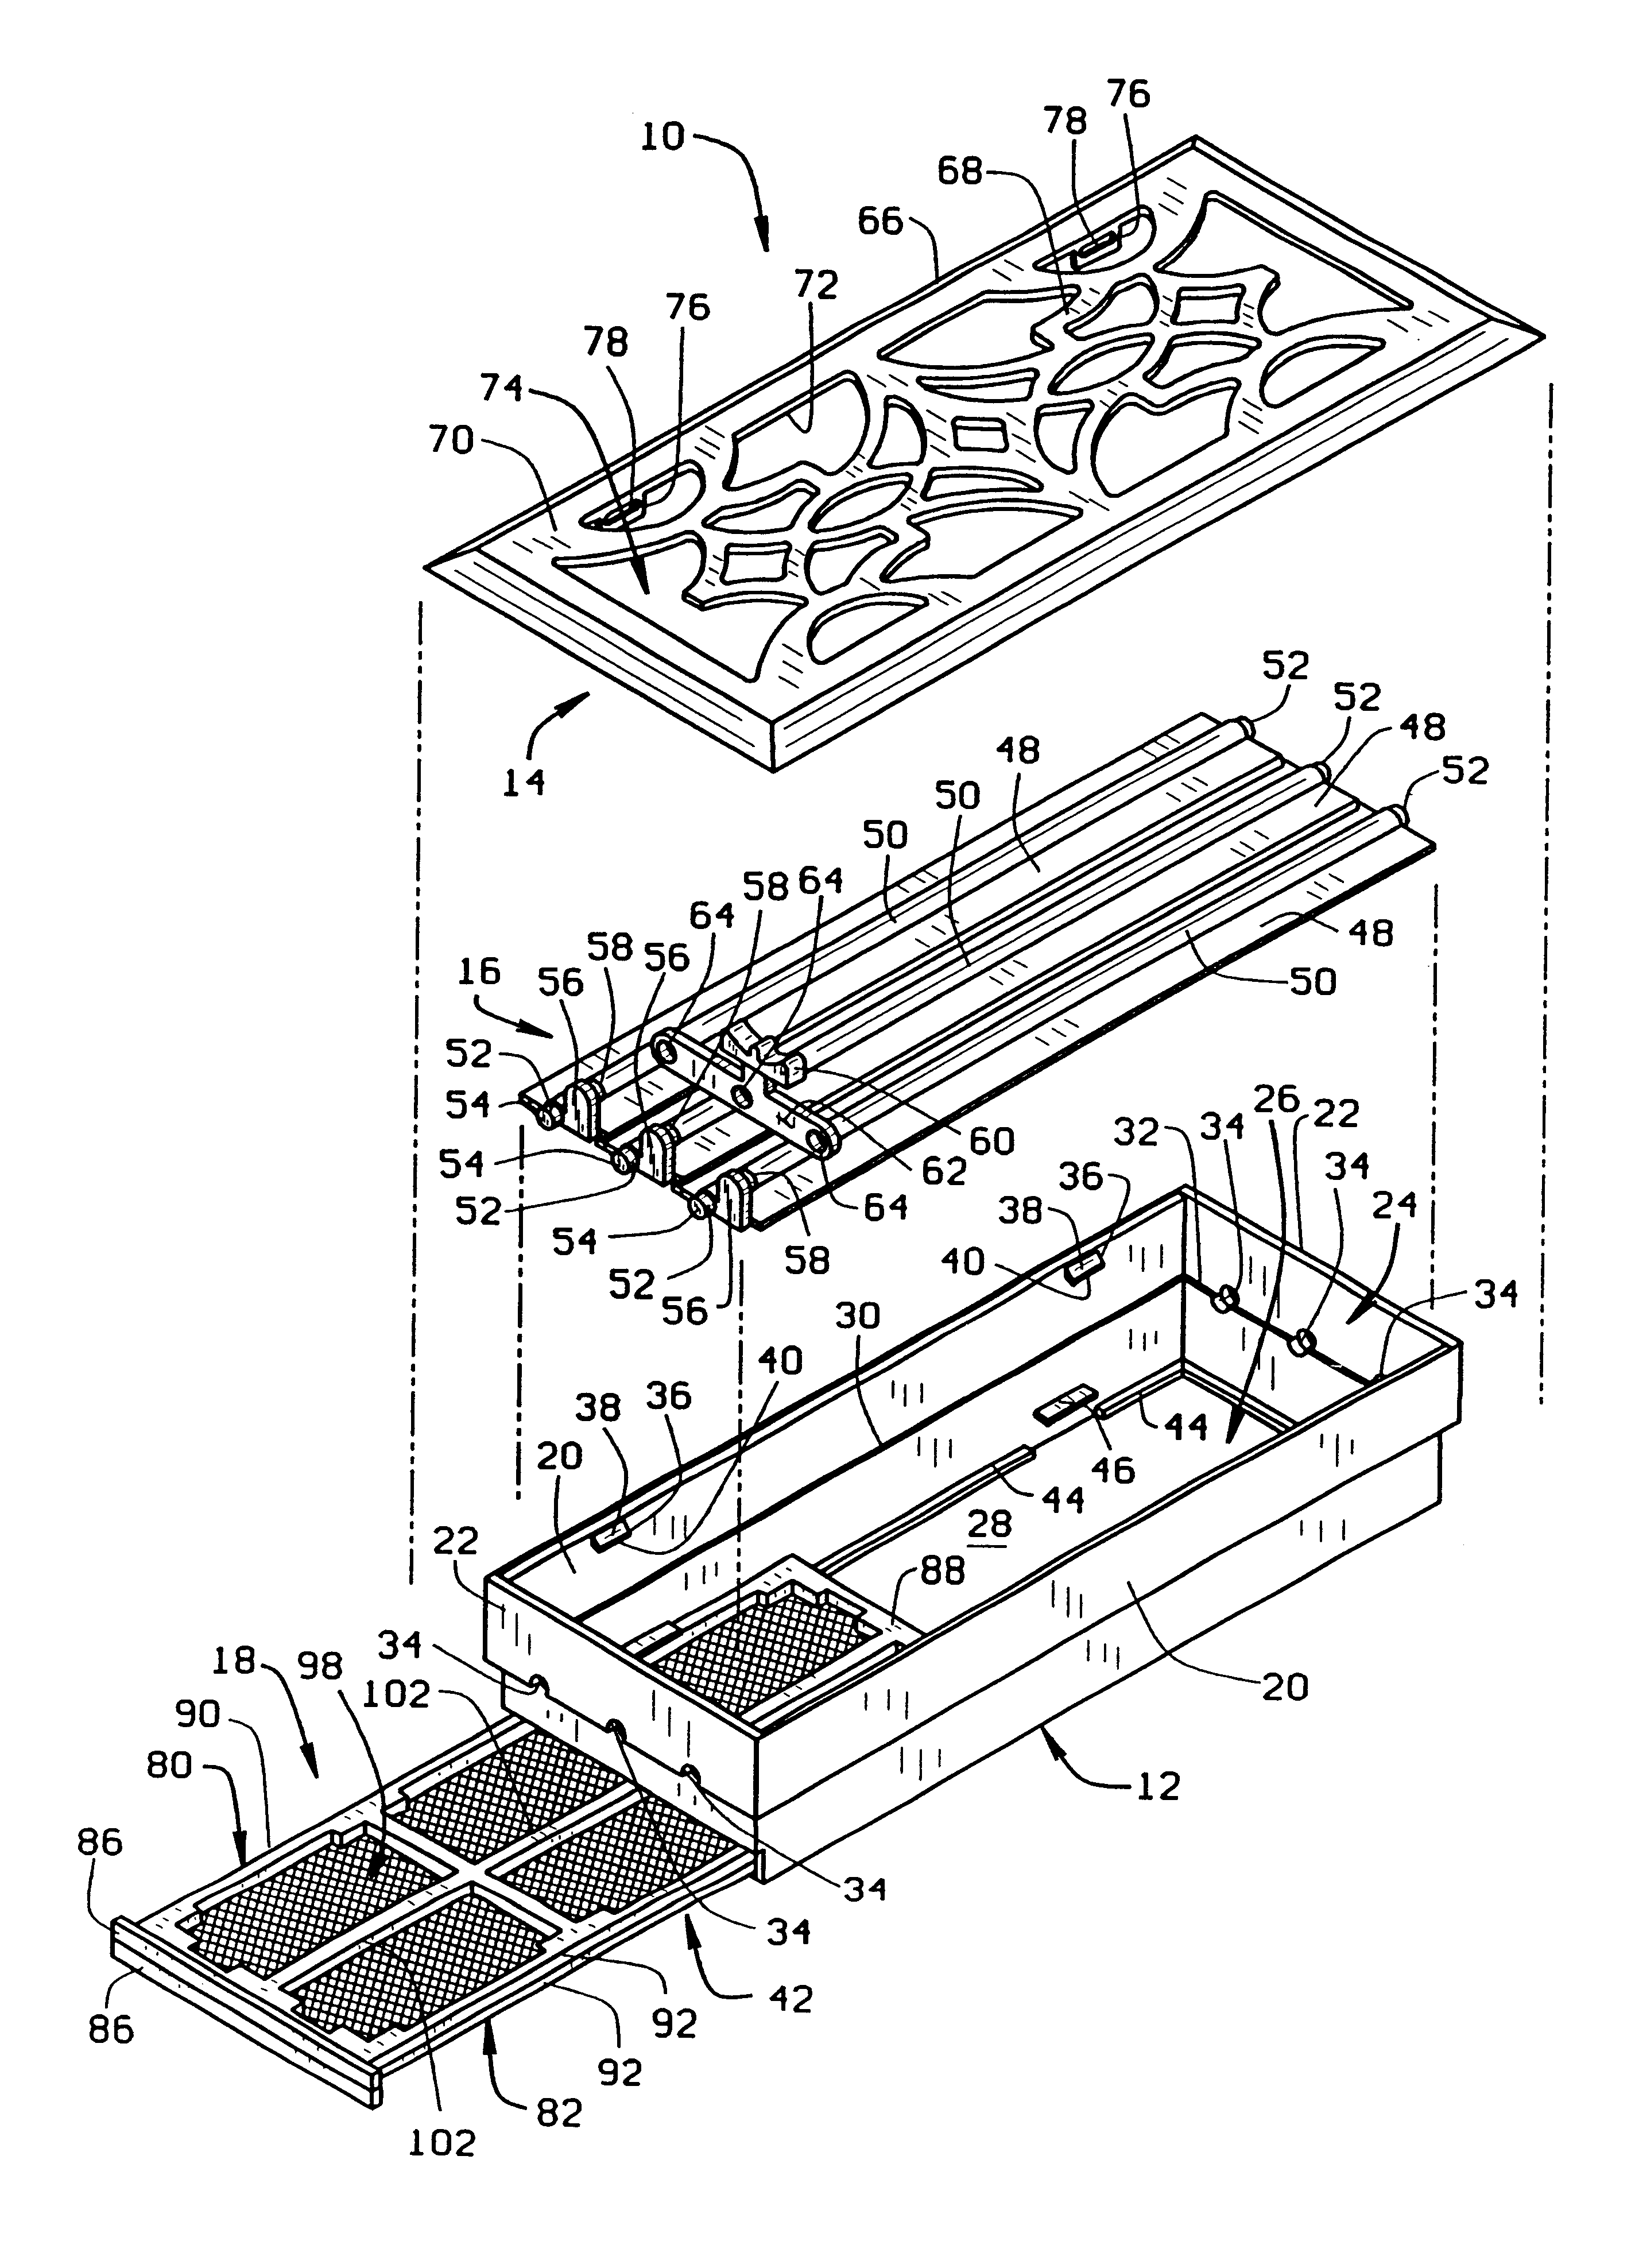 Register assembly for covering an air duct opening